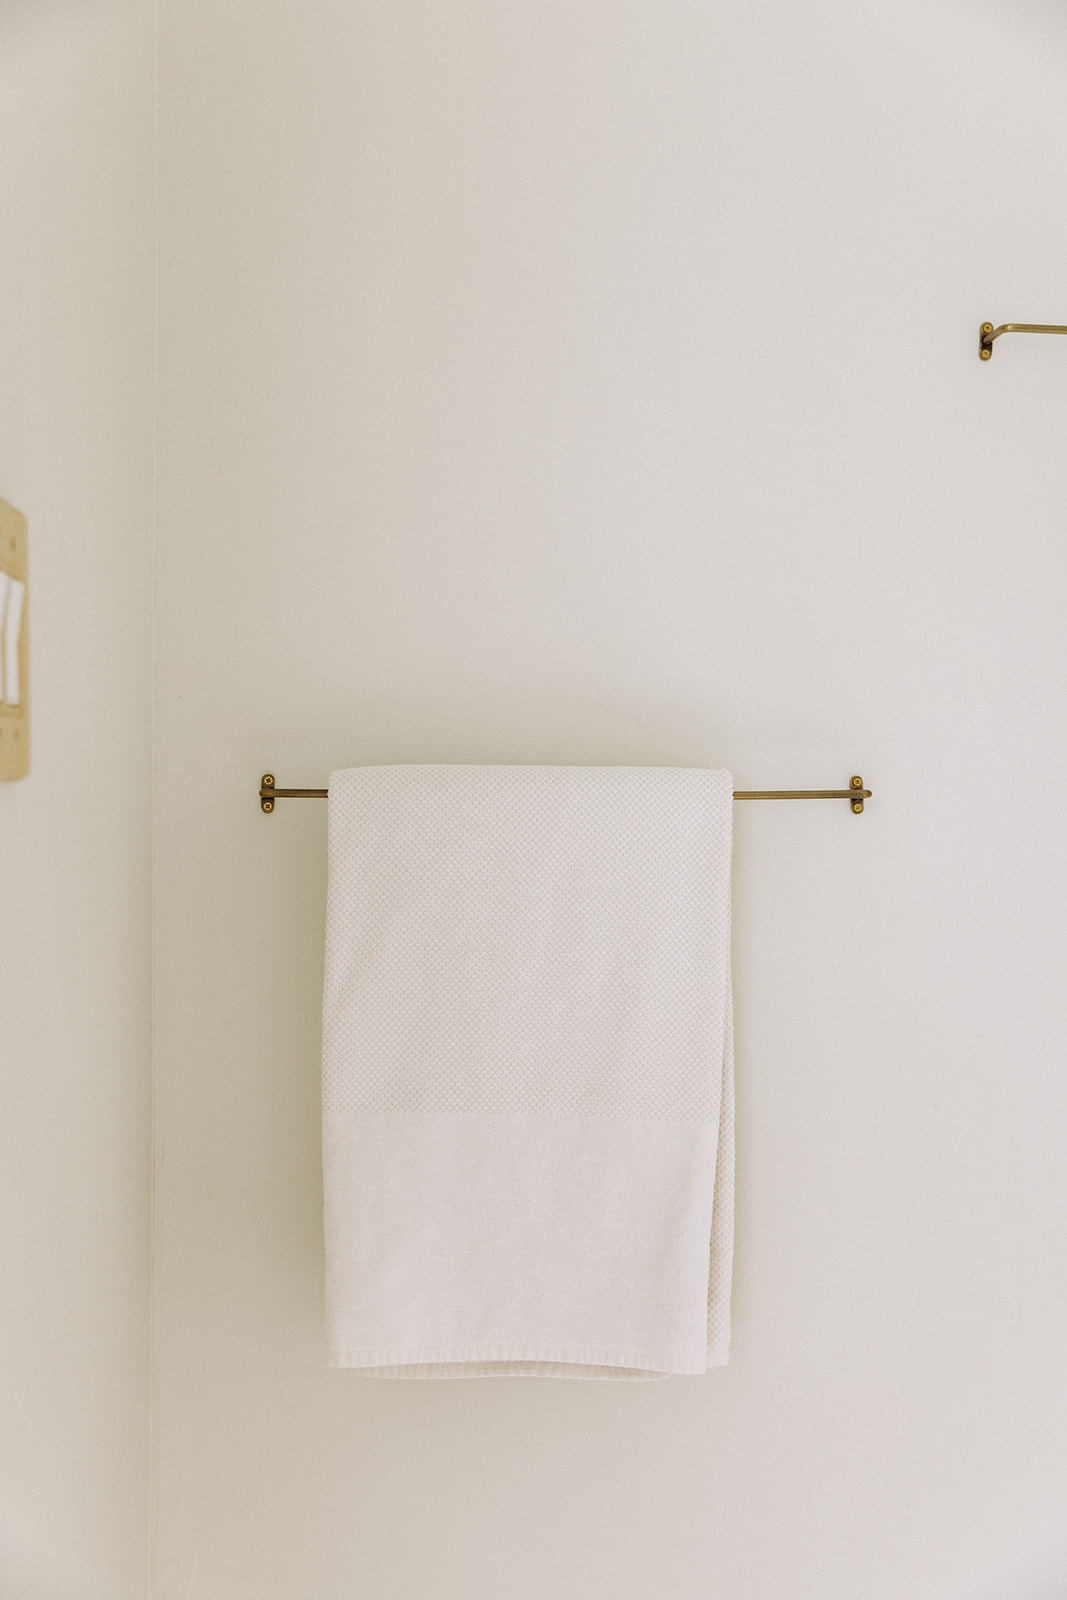 amber-interiors-brass-large-towel-holder-with-target-towel Revealing the After! Our Full Bathroom Renovation